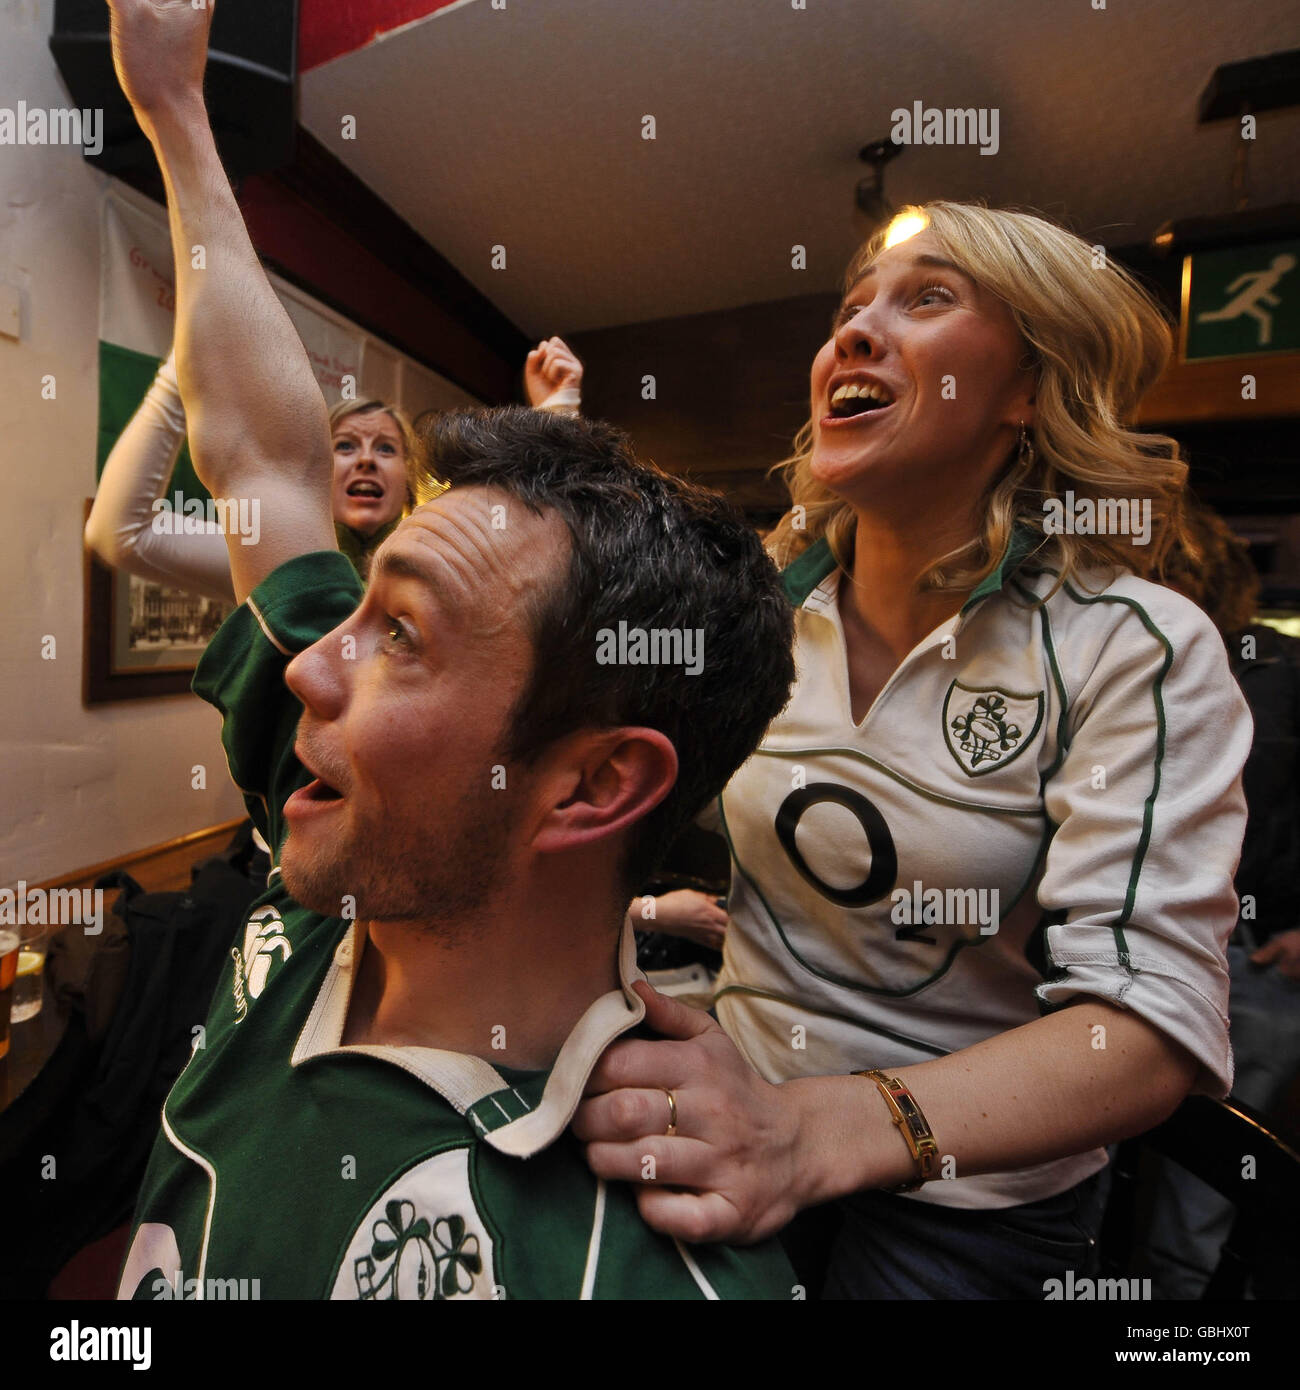 Ireland rugby fans celebrate as their team score their first try in the final match of the RBS 6 Nations between Wales and Ireland in the Borough Arms pub near the Millennium